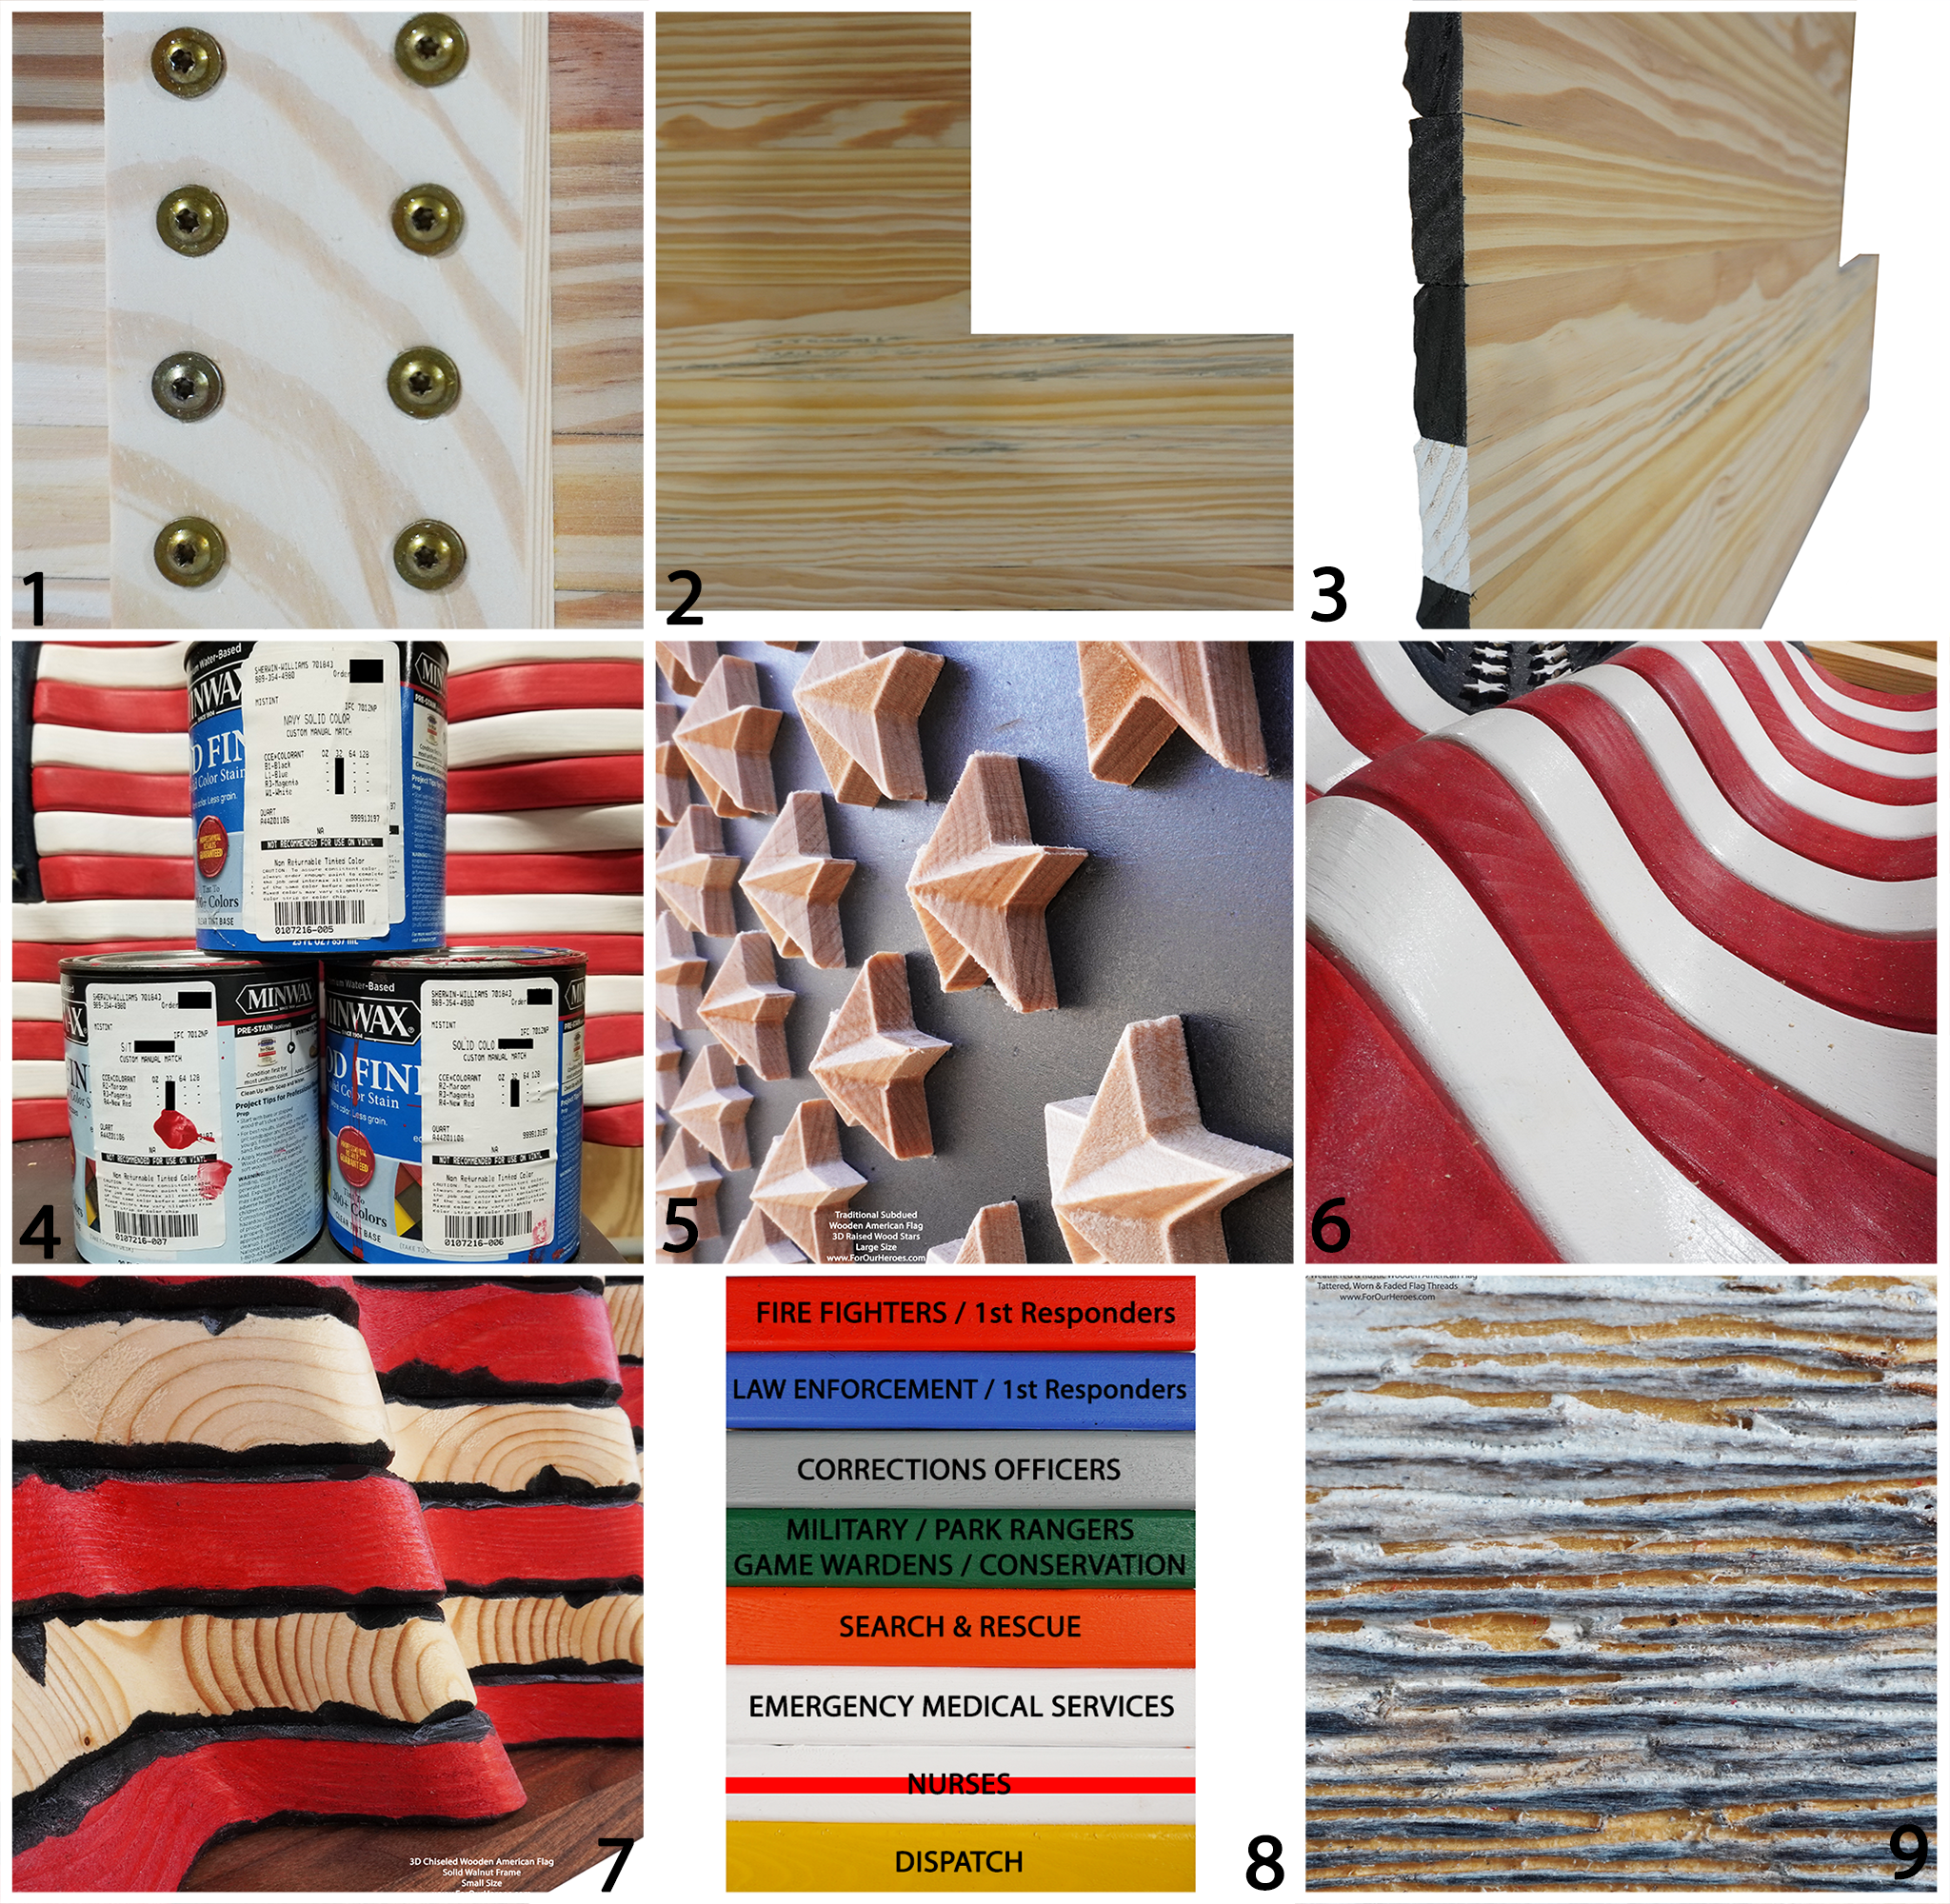 Craftsmanship and quality for our heroes 8 grid visual incredible detail creativity wooden american flags attention to detail made in posen michigan bcd3d227 5637 4164 8f04 477539f1d56c